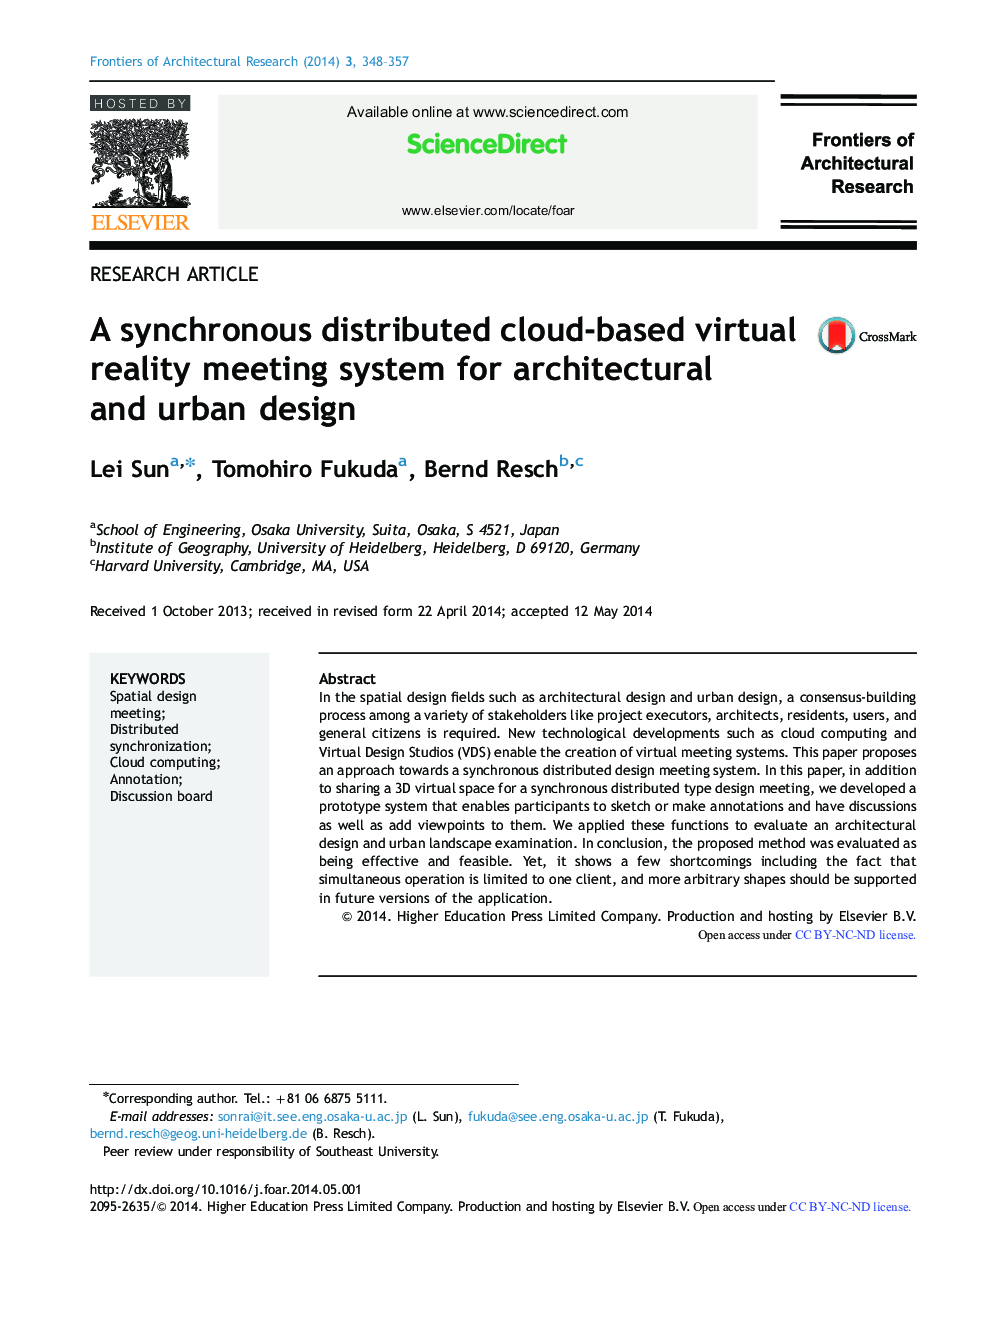 A synchronous distributed cloud-based virtual reality meeting system for architectural and urban design 